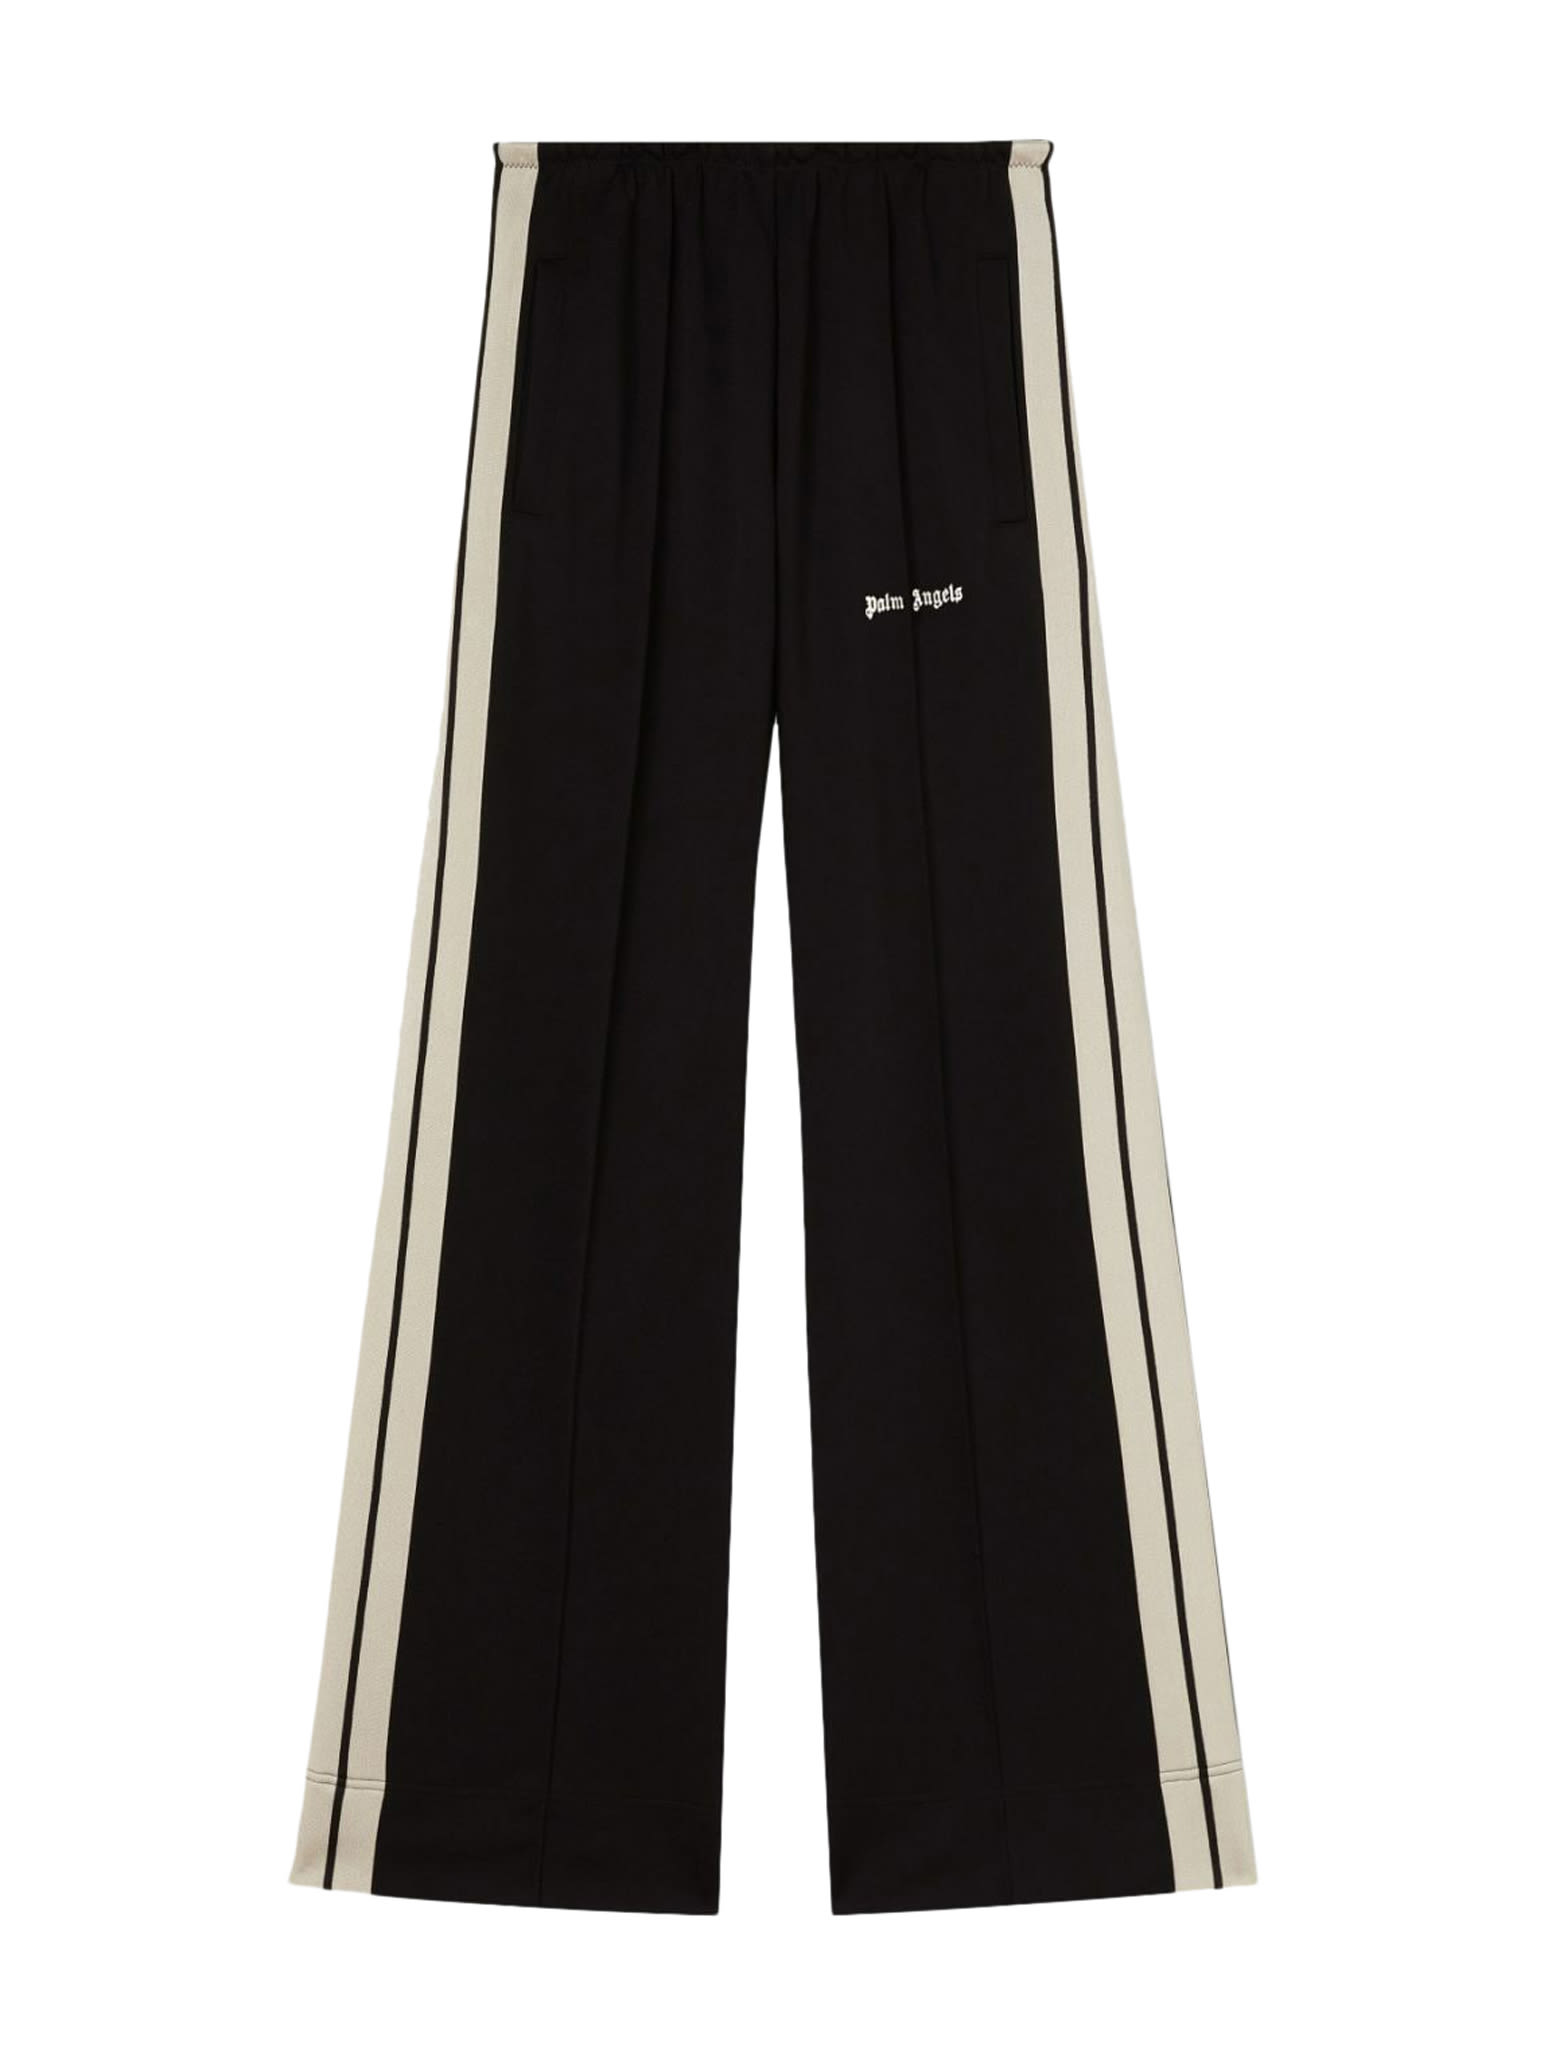 PALM ANGELS CLASSIC LOOSE TRACK PANTS BLACK OFF WHIT